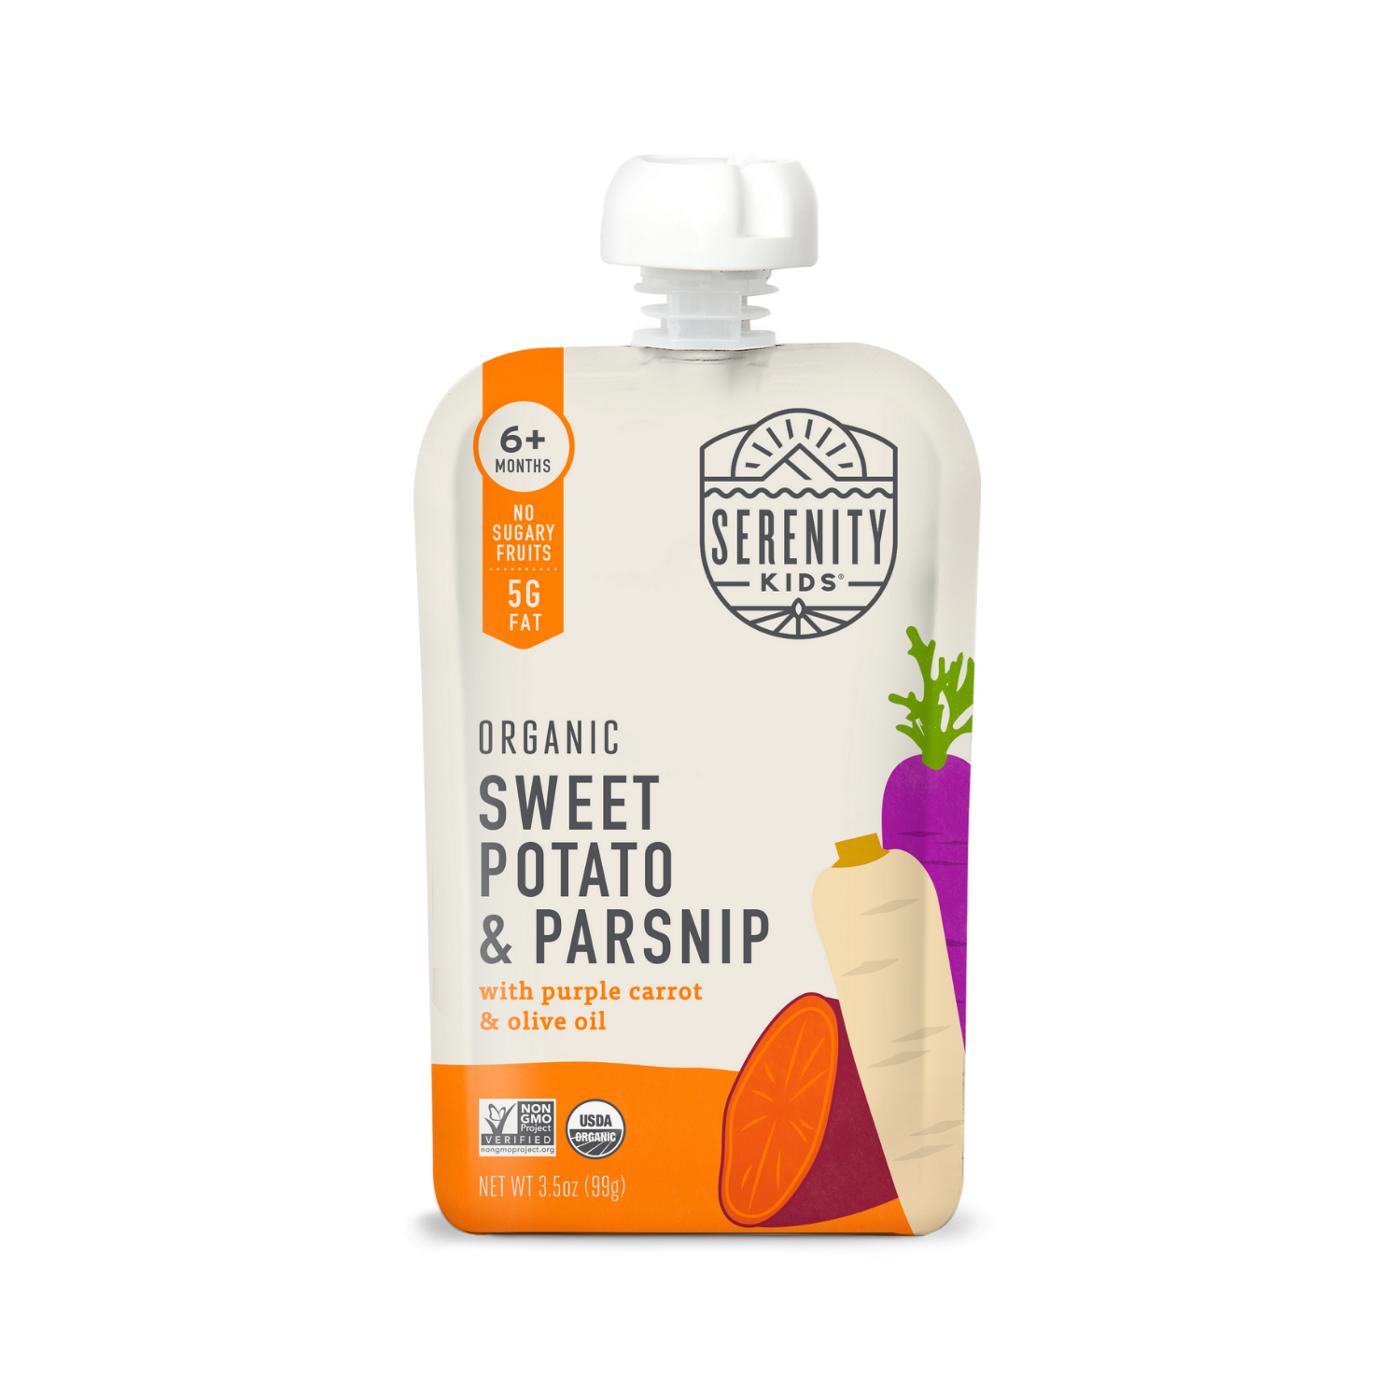 Serenity Kids Baby Food Pouches Organic Sweet Potato, Parsnip Carrot; image 1 of 5